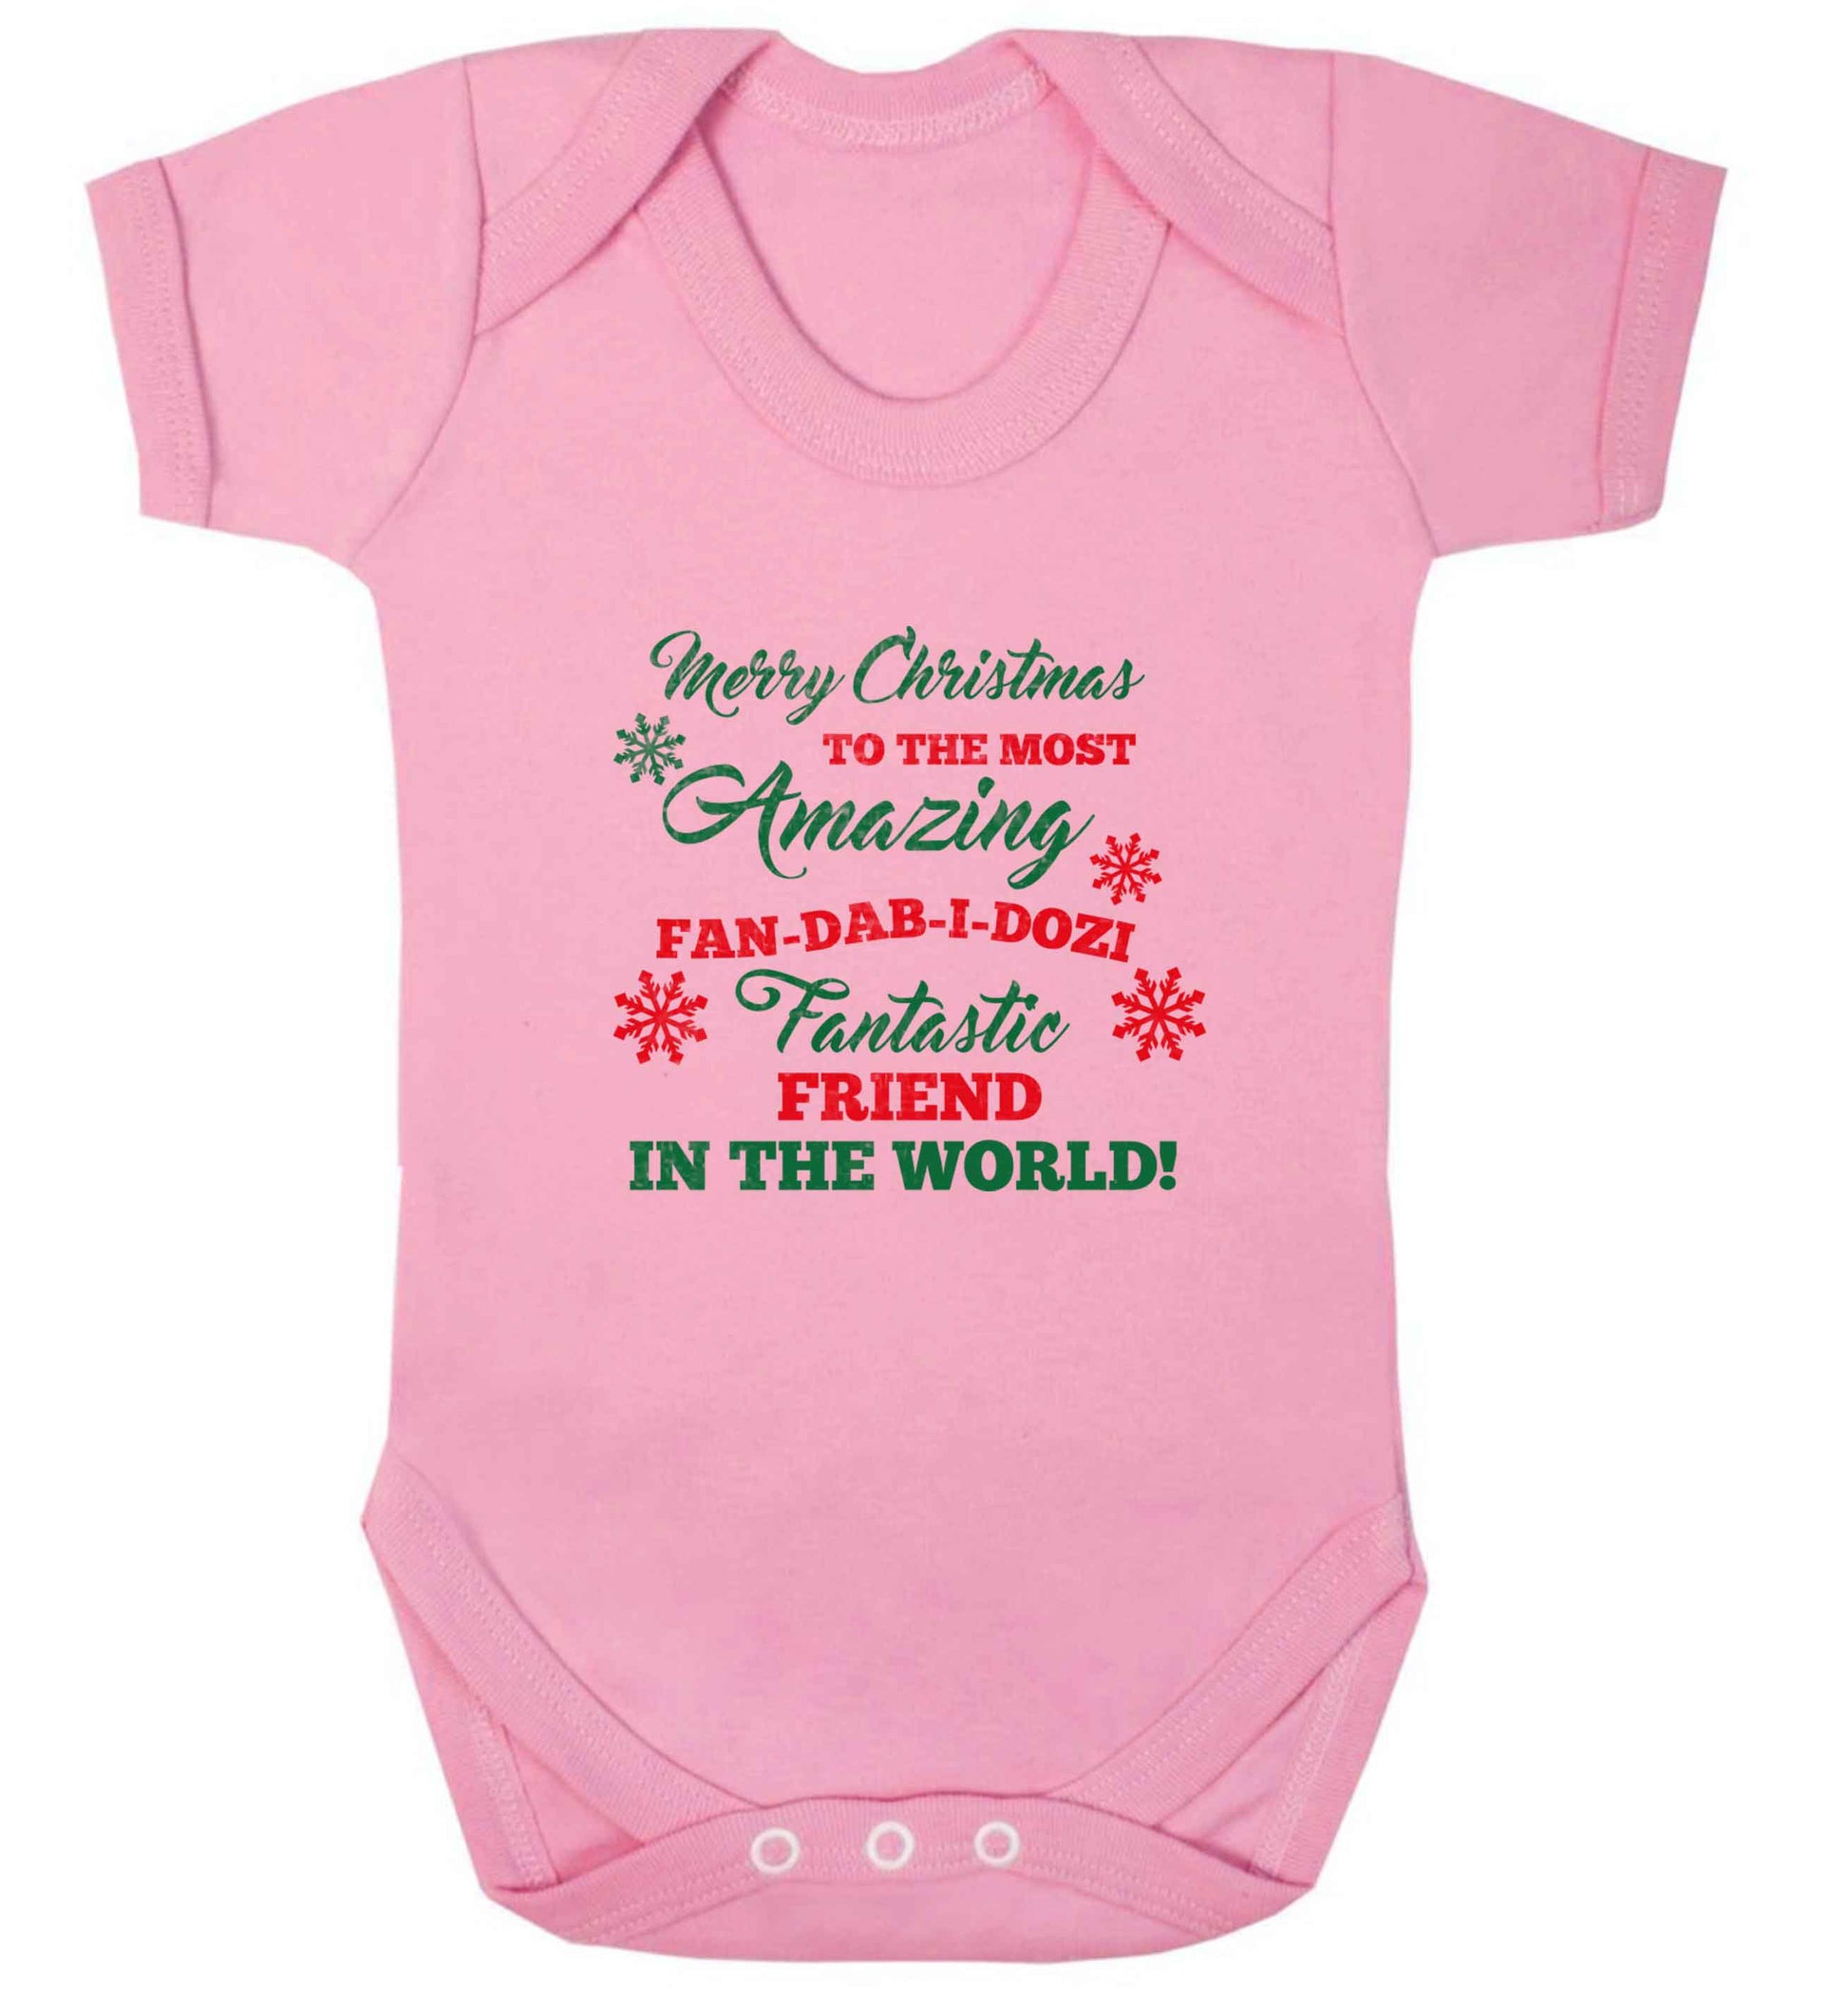 Merry Christmas to the most amazing fan-dab-i-dozi fantasic friend in the world baby vest pale pink 18-24 months